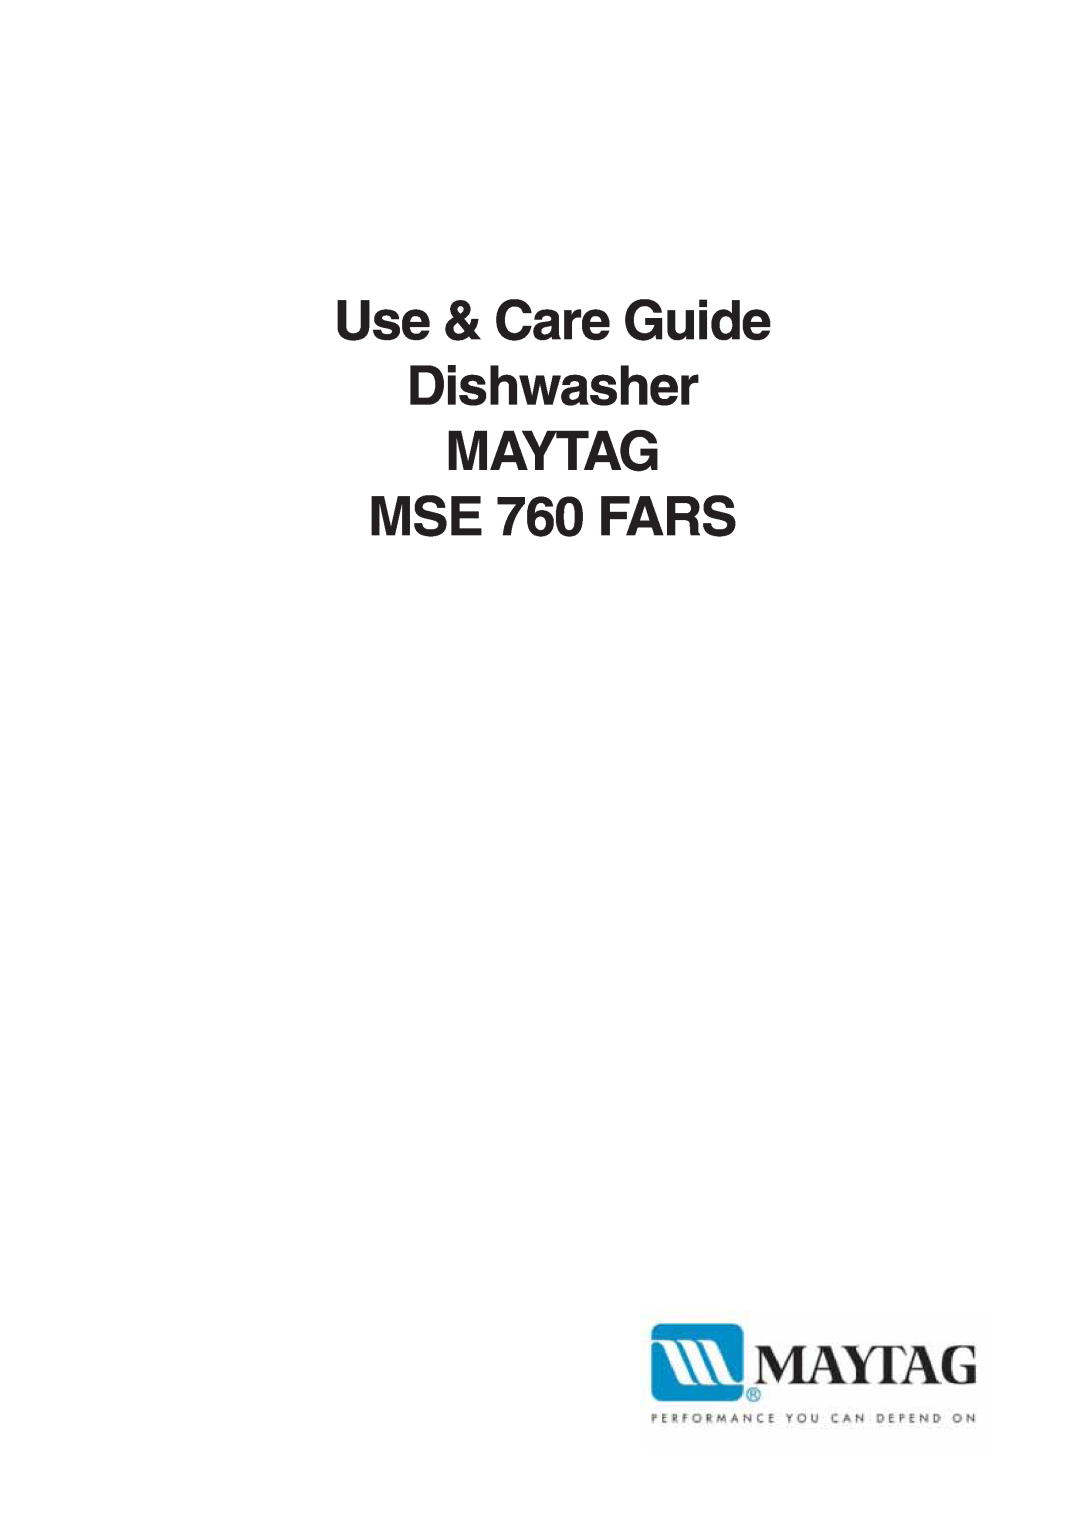 Maytag 760S manual Use & Care Guide Dishwasher MAYTAG MSE 760 FARS 